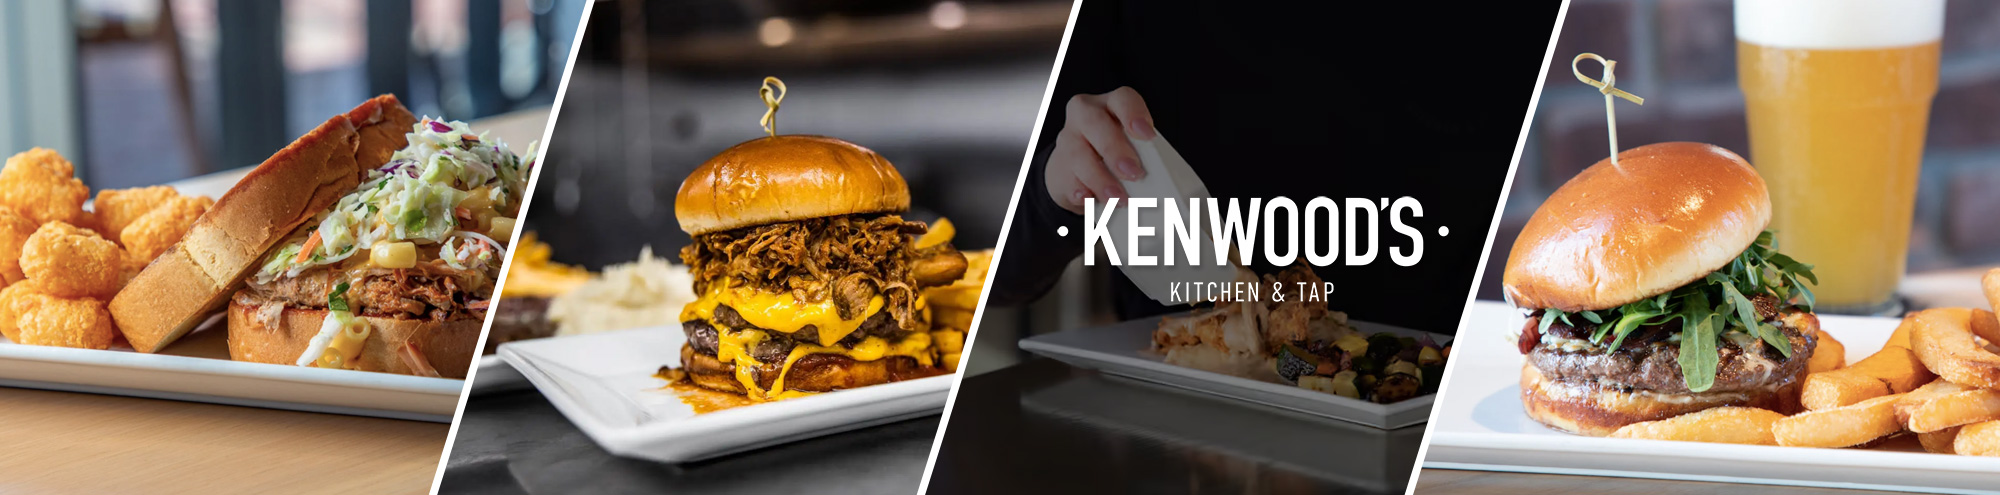 Kenwood's Kitchen and Tap